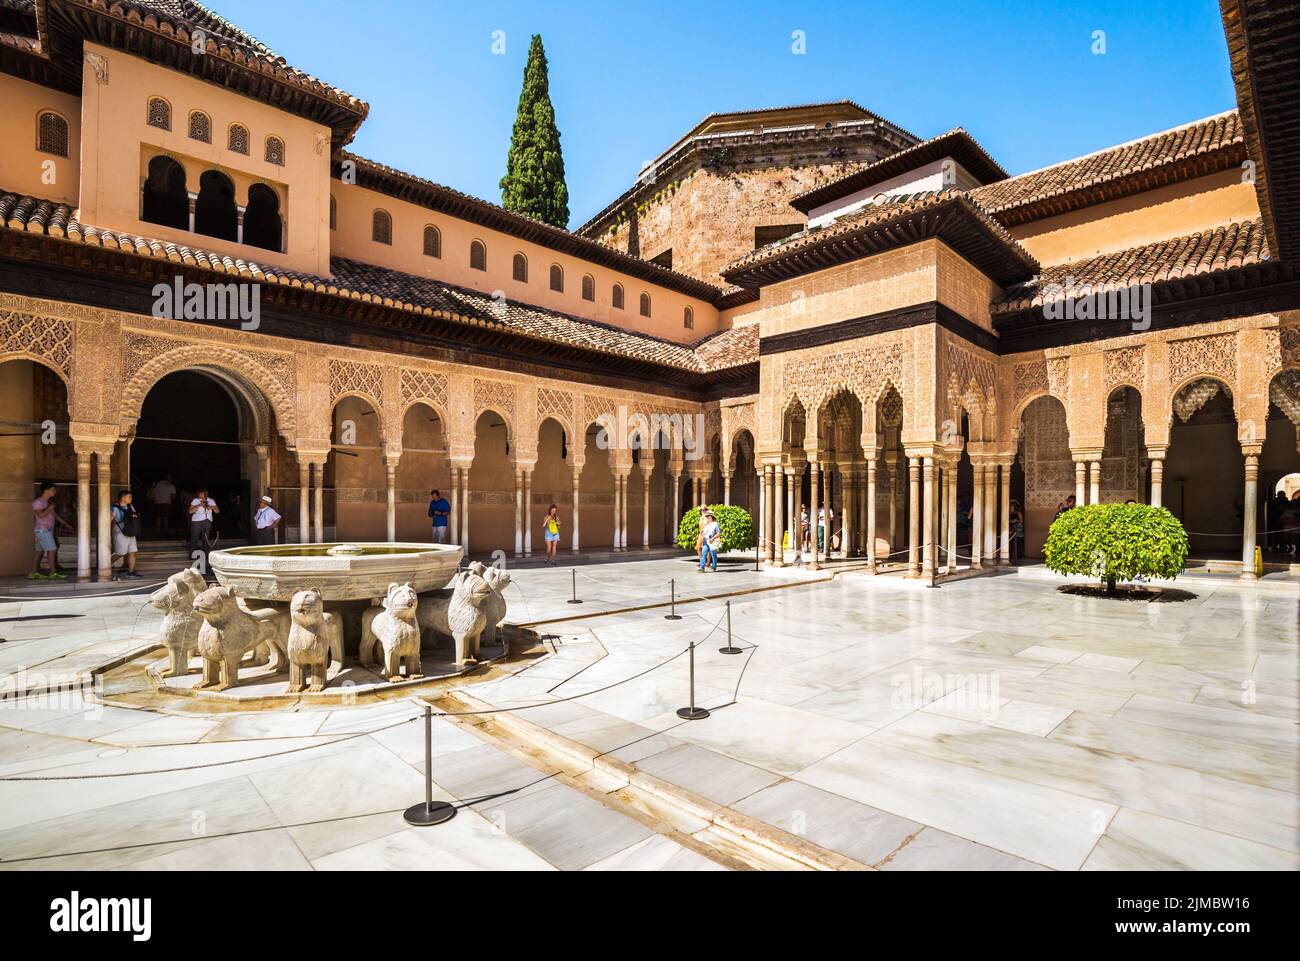 The Palace of lions in Alhambra, Granada, Spain. Stock Photo